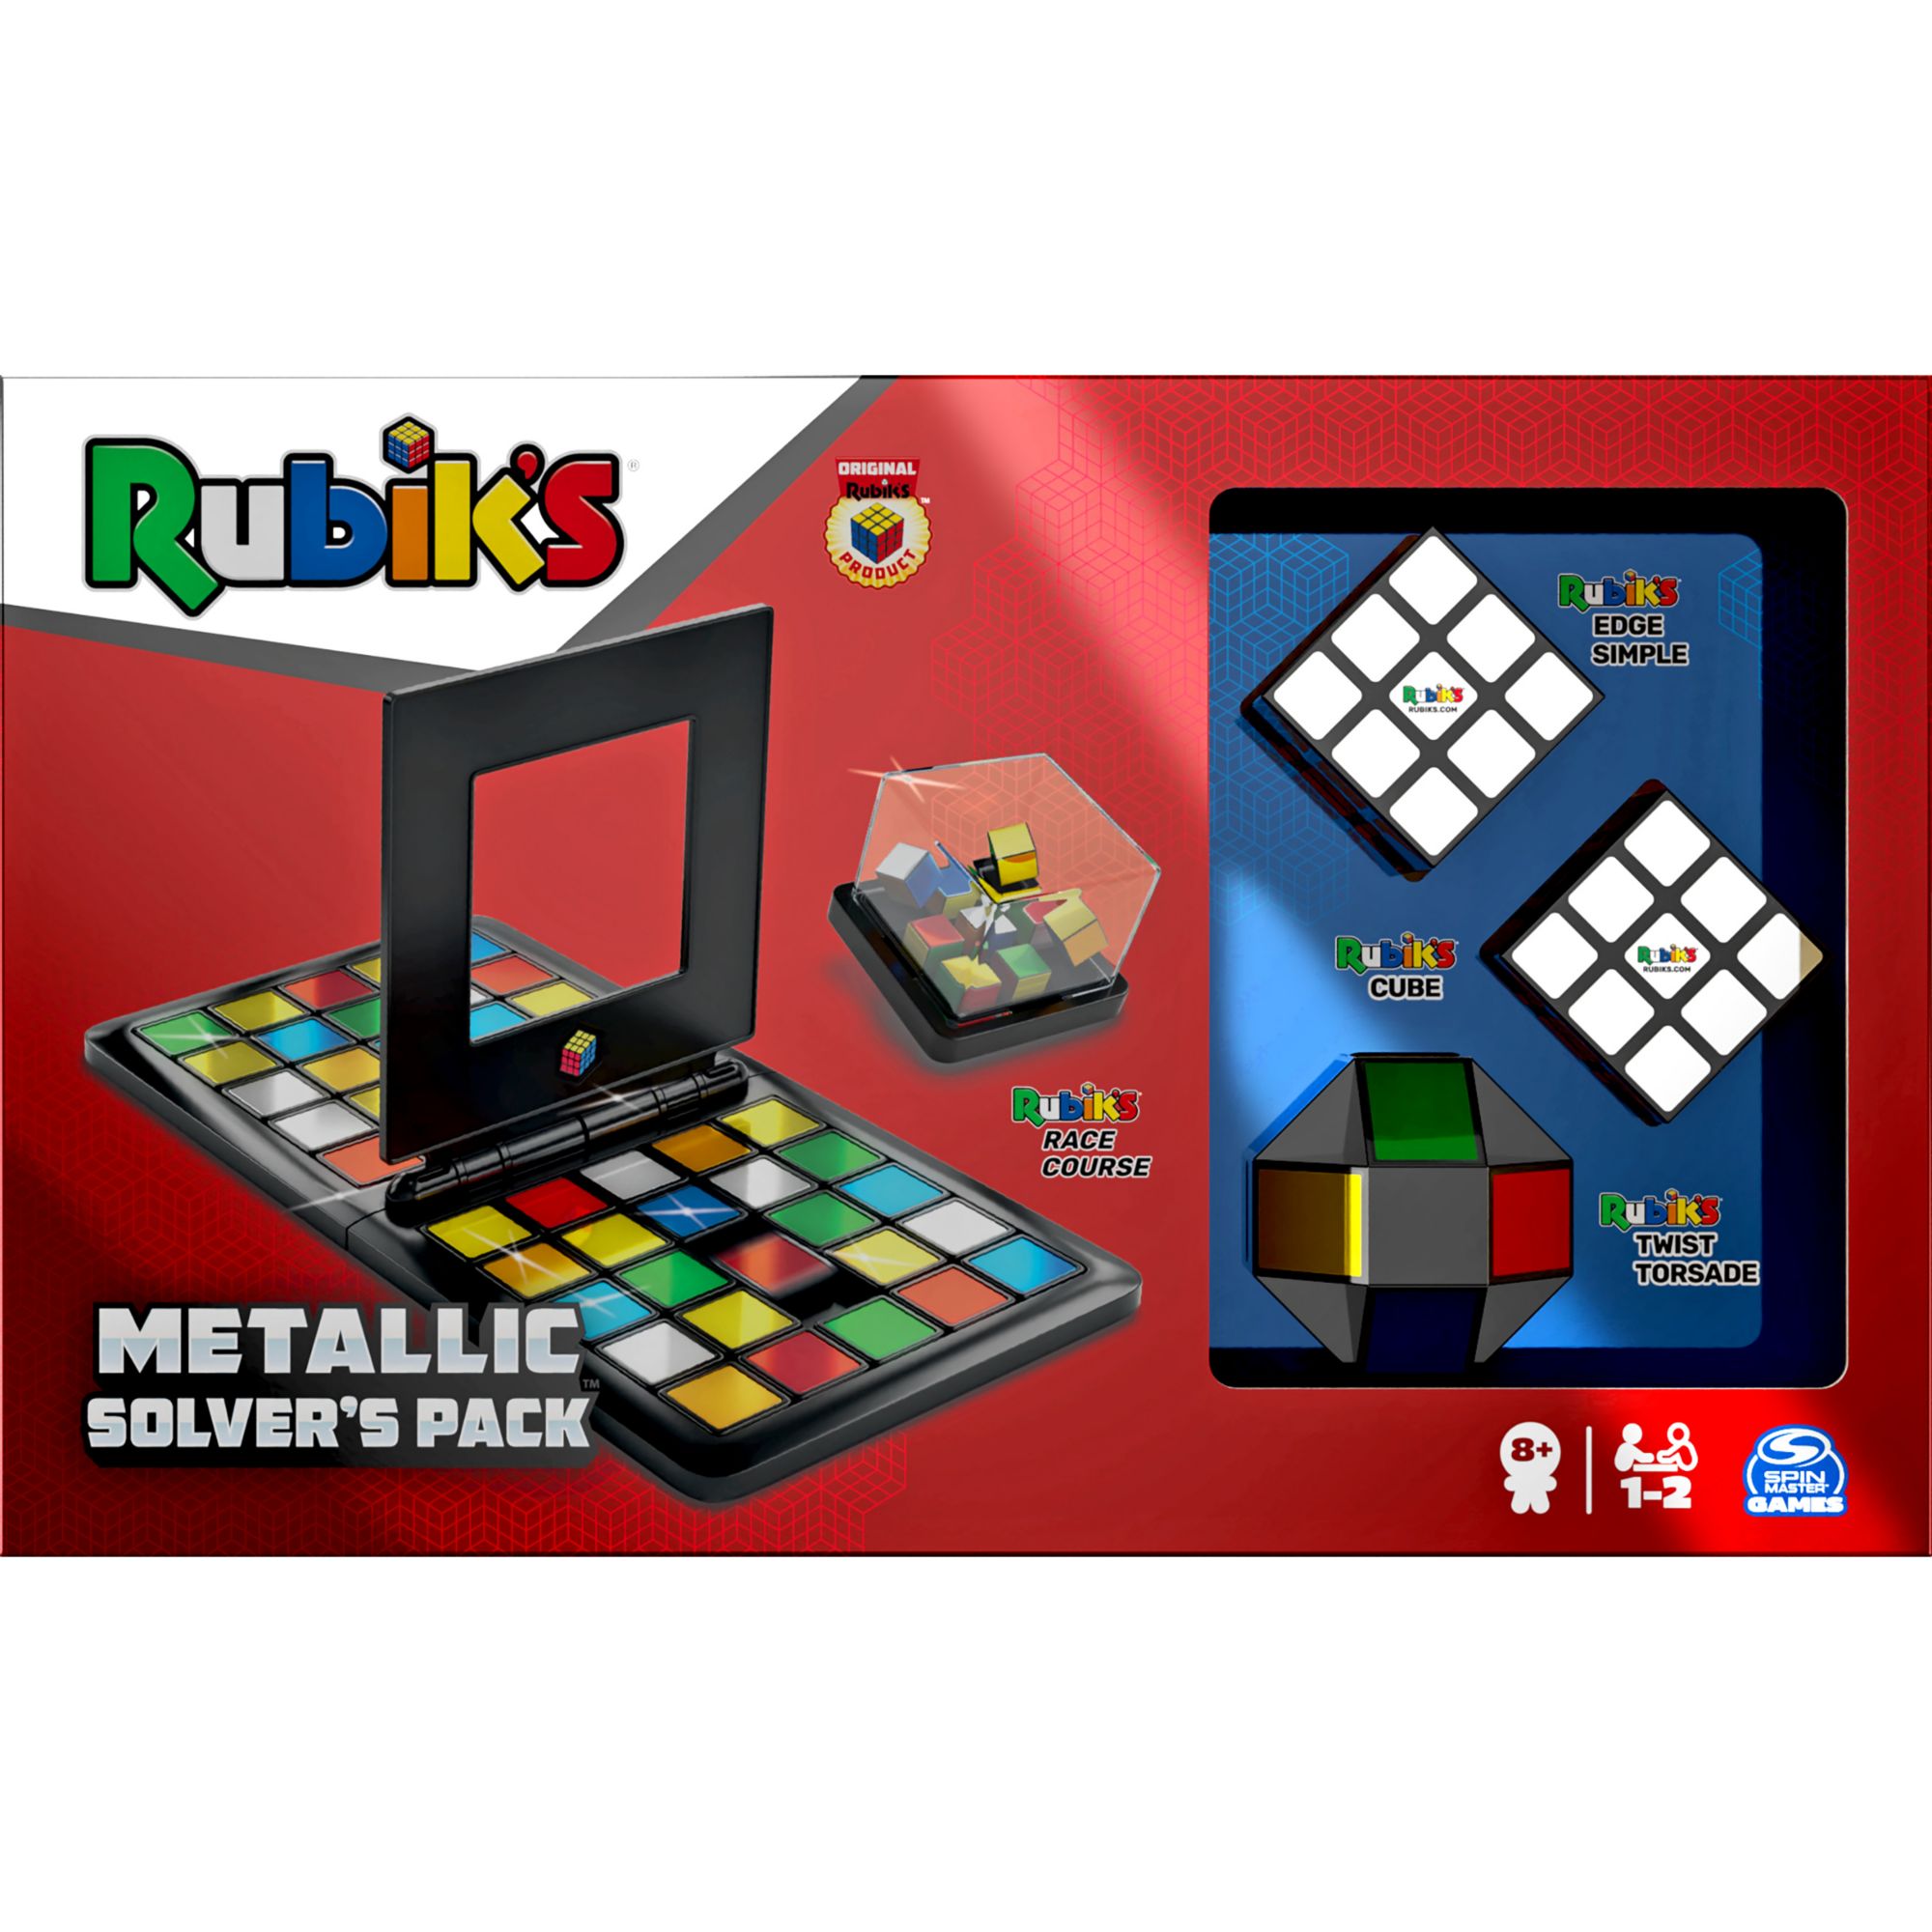 Maaron Block Rubiks Race Game - Block Rubiks Race Game . Buy Race cube toys  in India. shop for Maaron products in India.